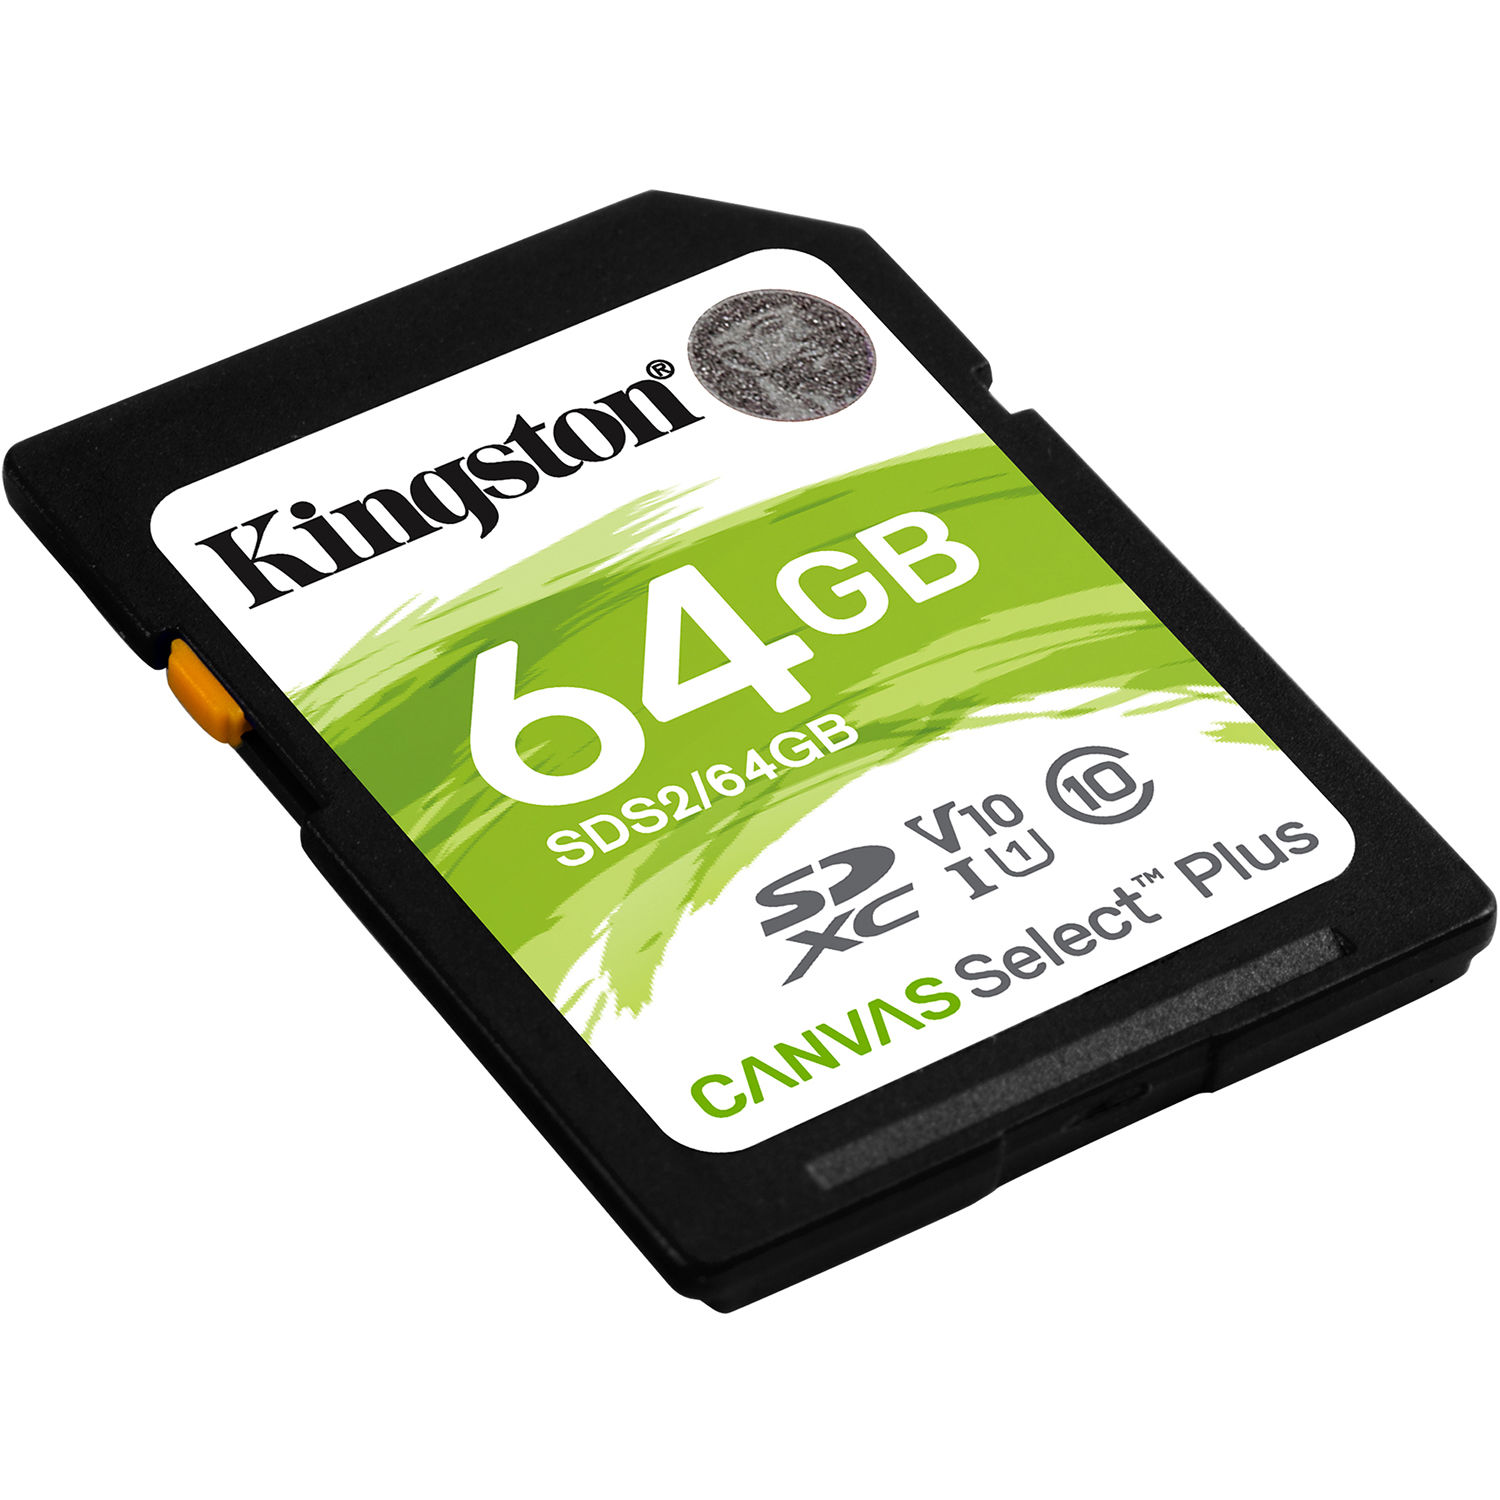 100MBs Works with Kingston Kingston 64GB LG Arena 2 MicroSDXC Canvas Select Plus Card Verified by SanFlash.